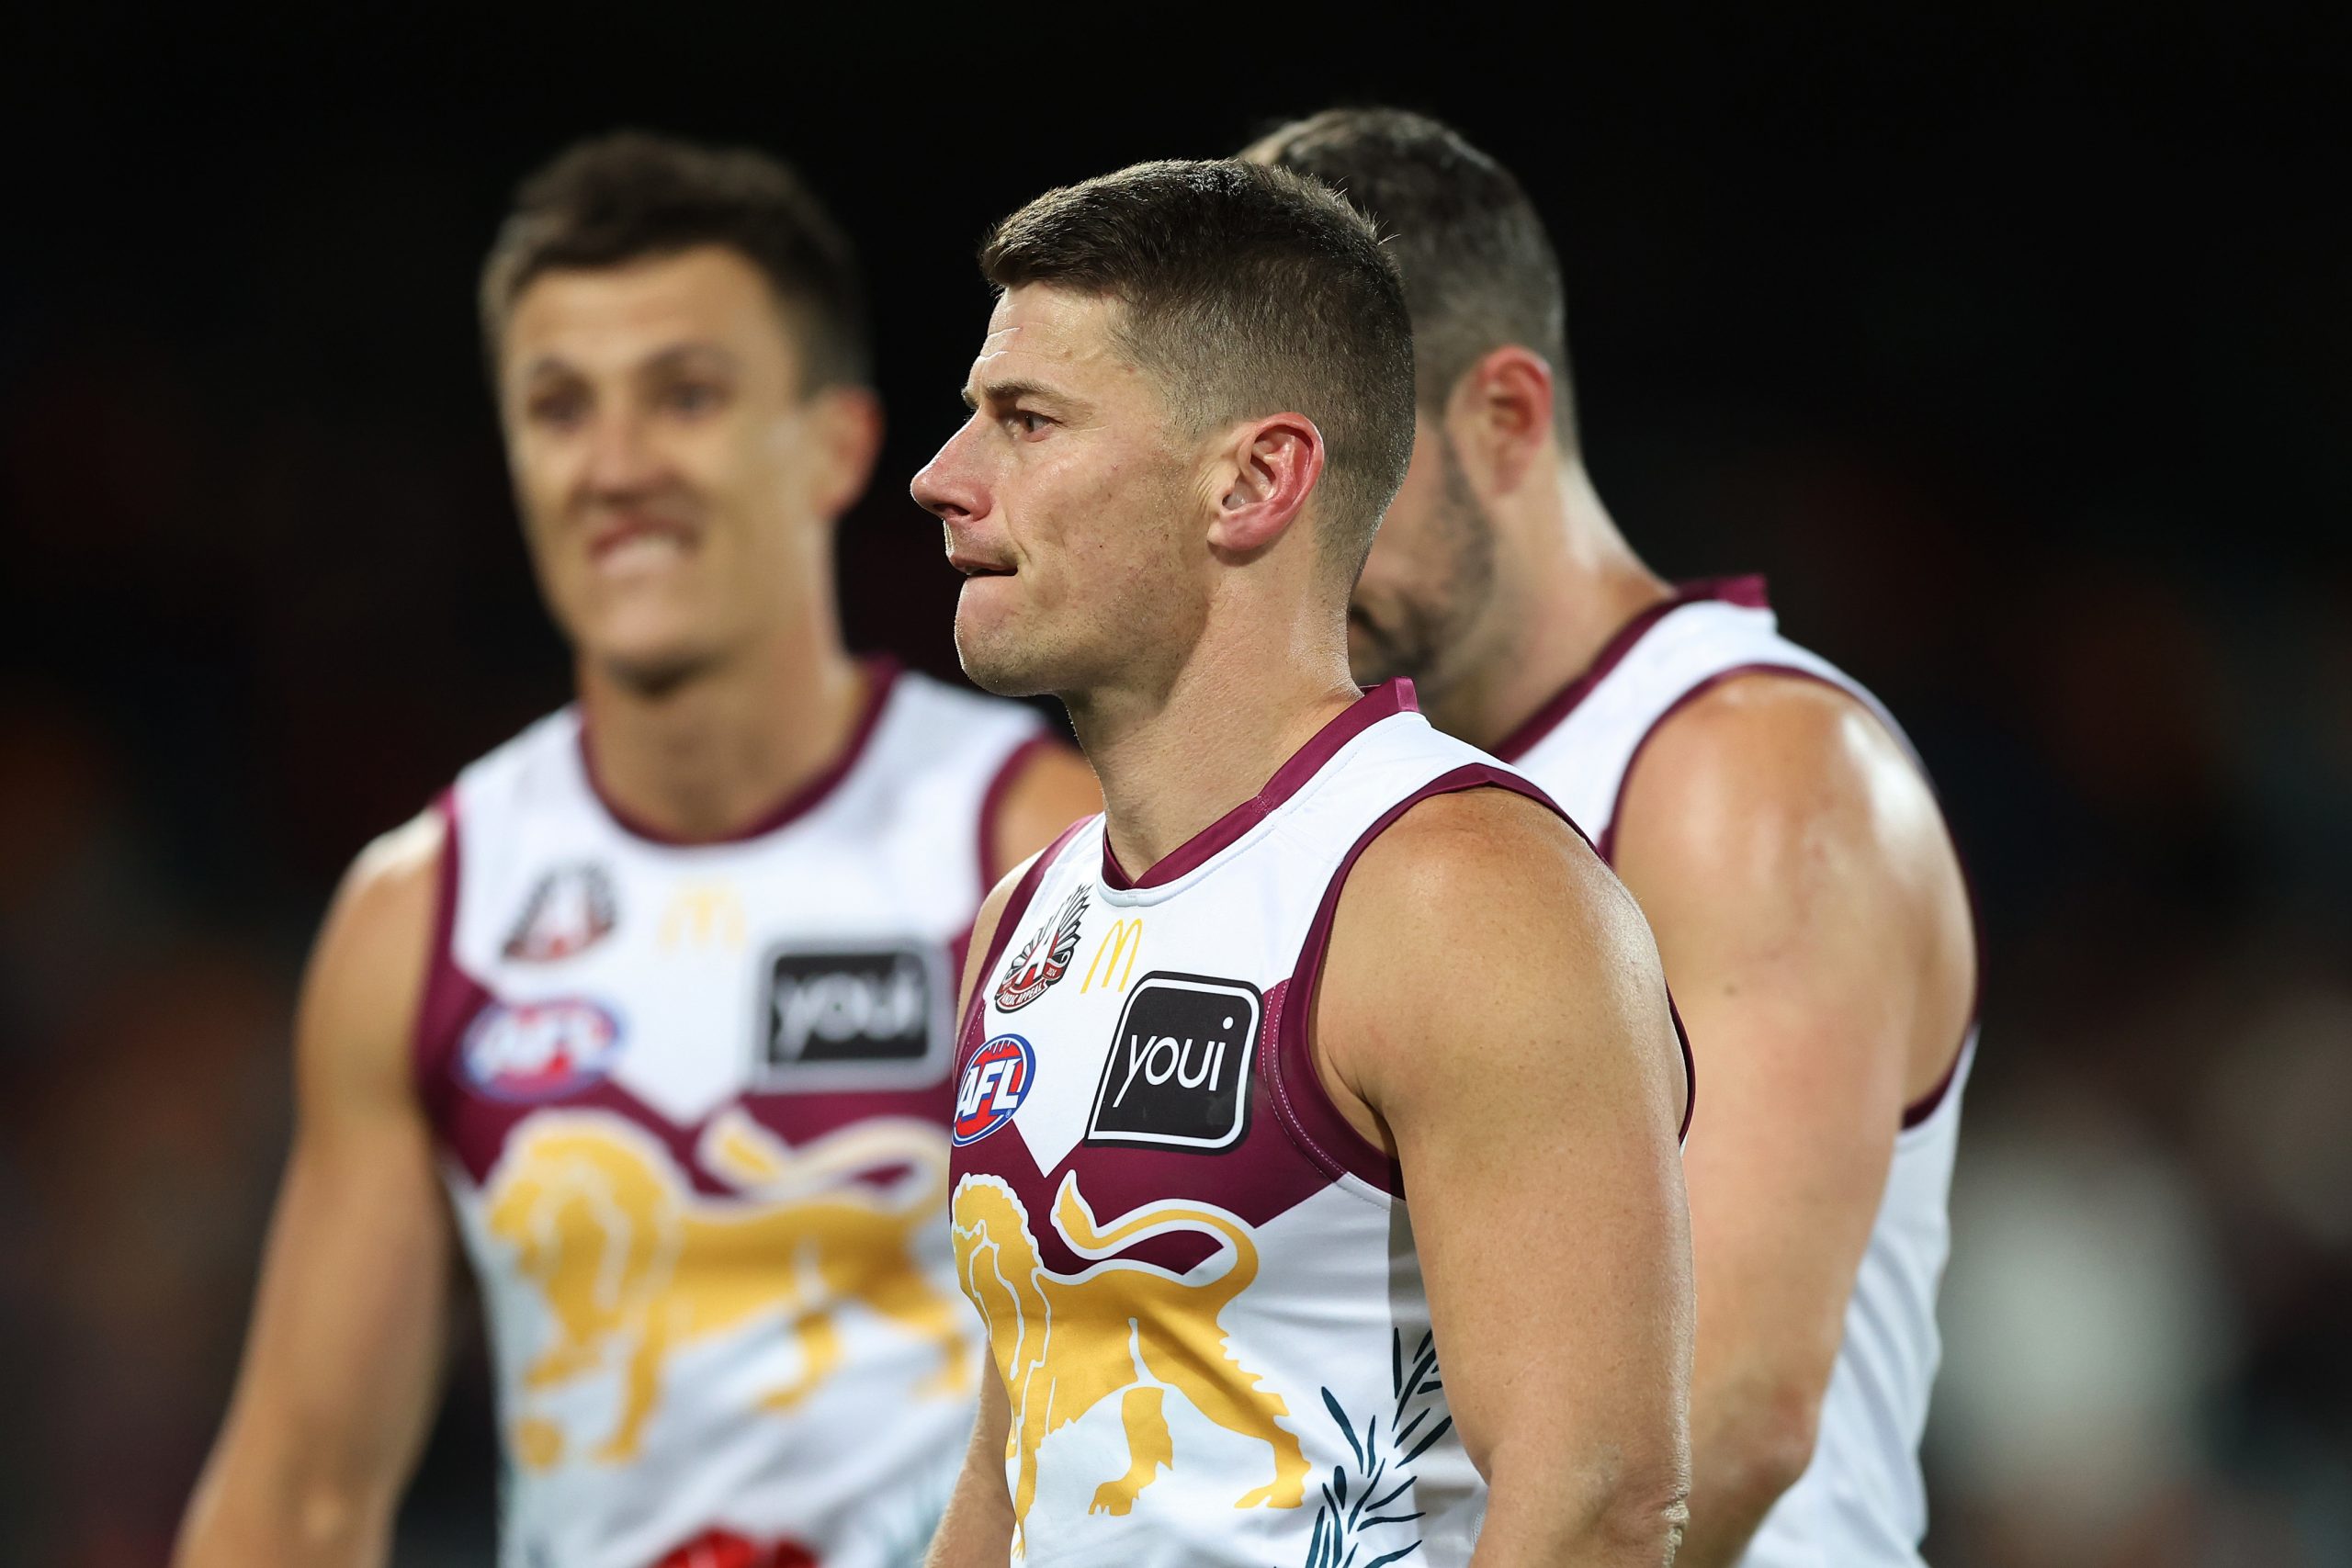 The Lions have dropped off since last year's finals series.